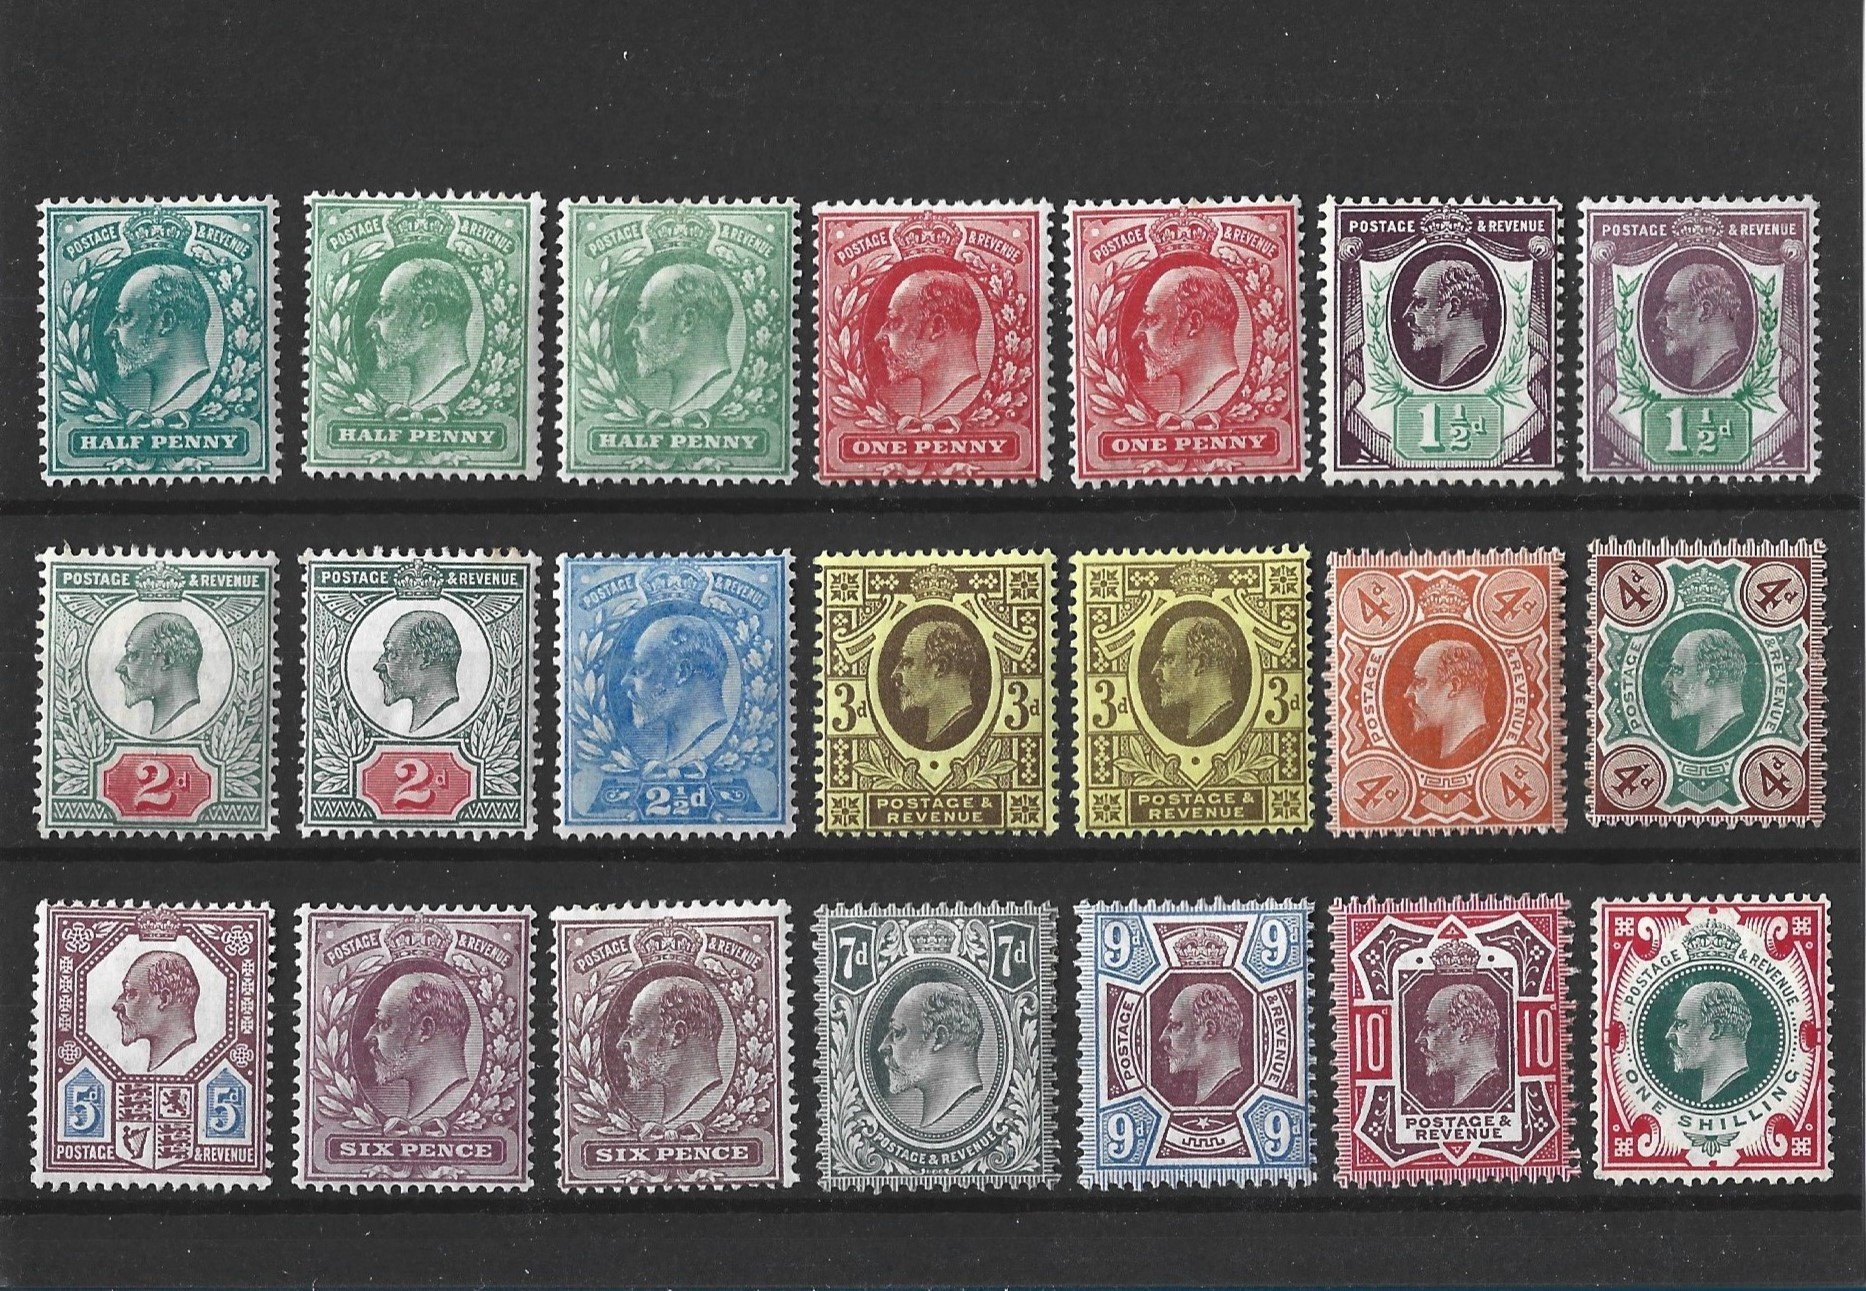 1902 Edward VII Jubilee Issue Set of Stamps.